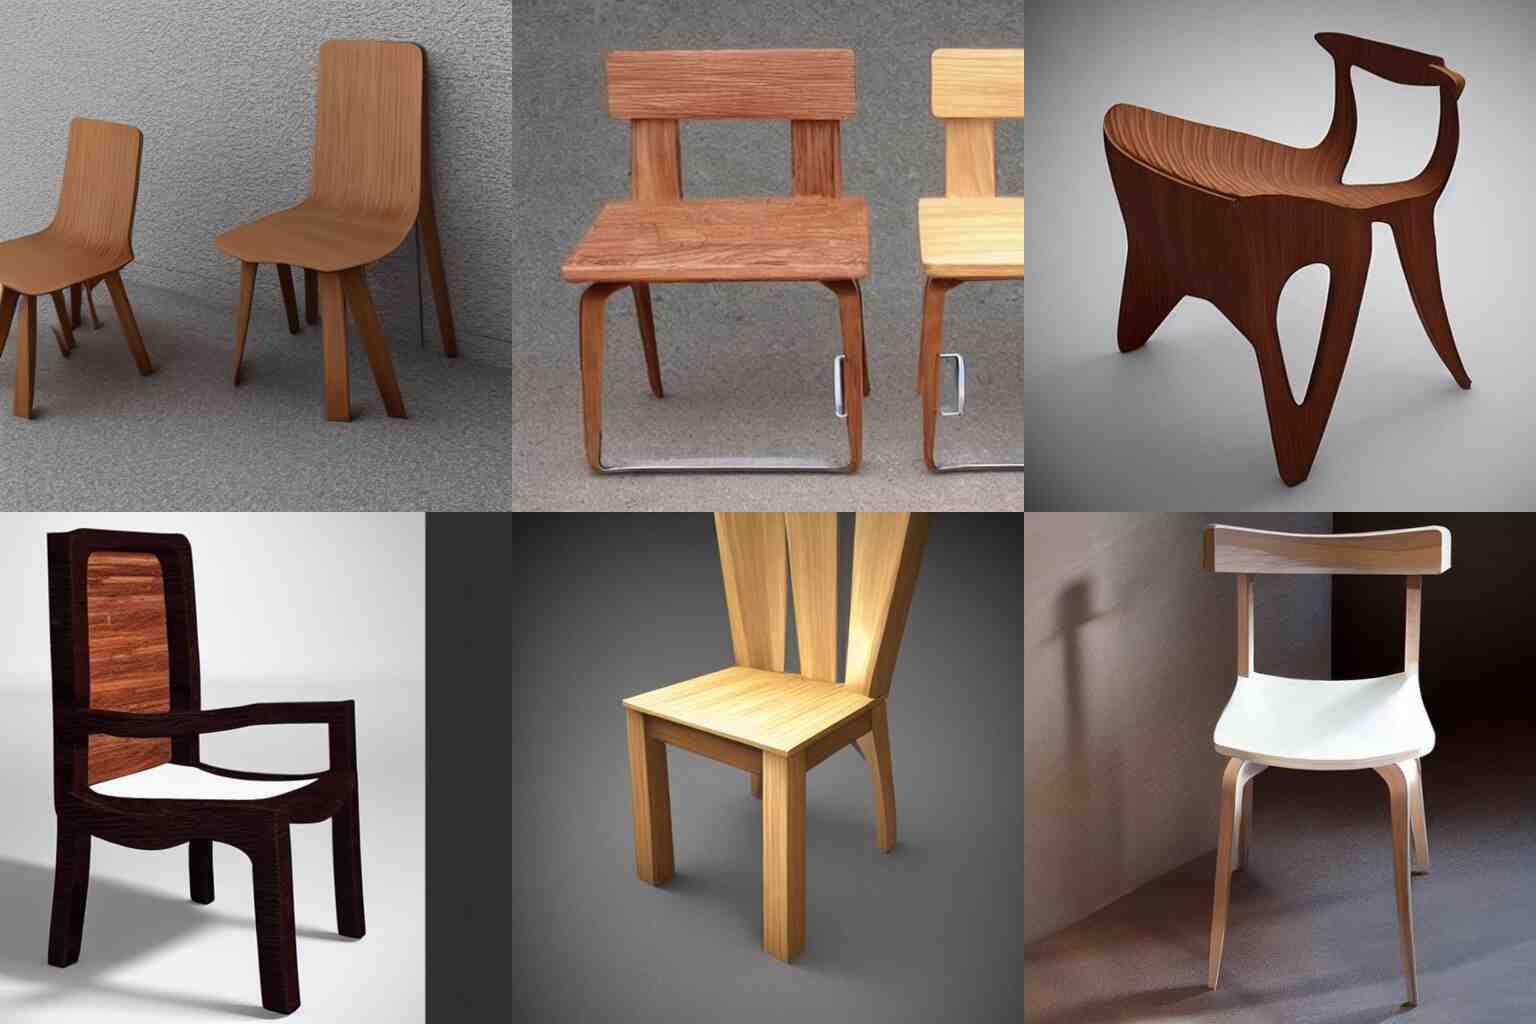 wooden chair design coffee inspired, concept 